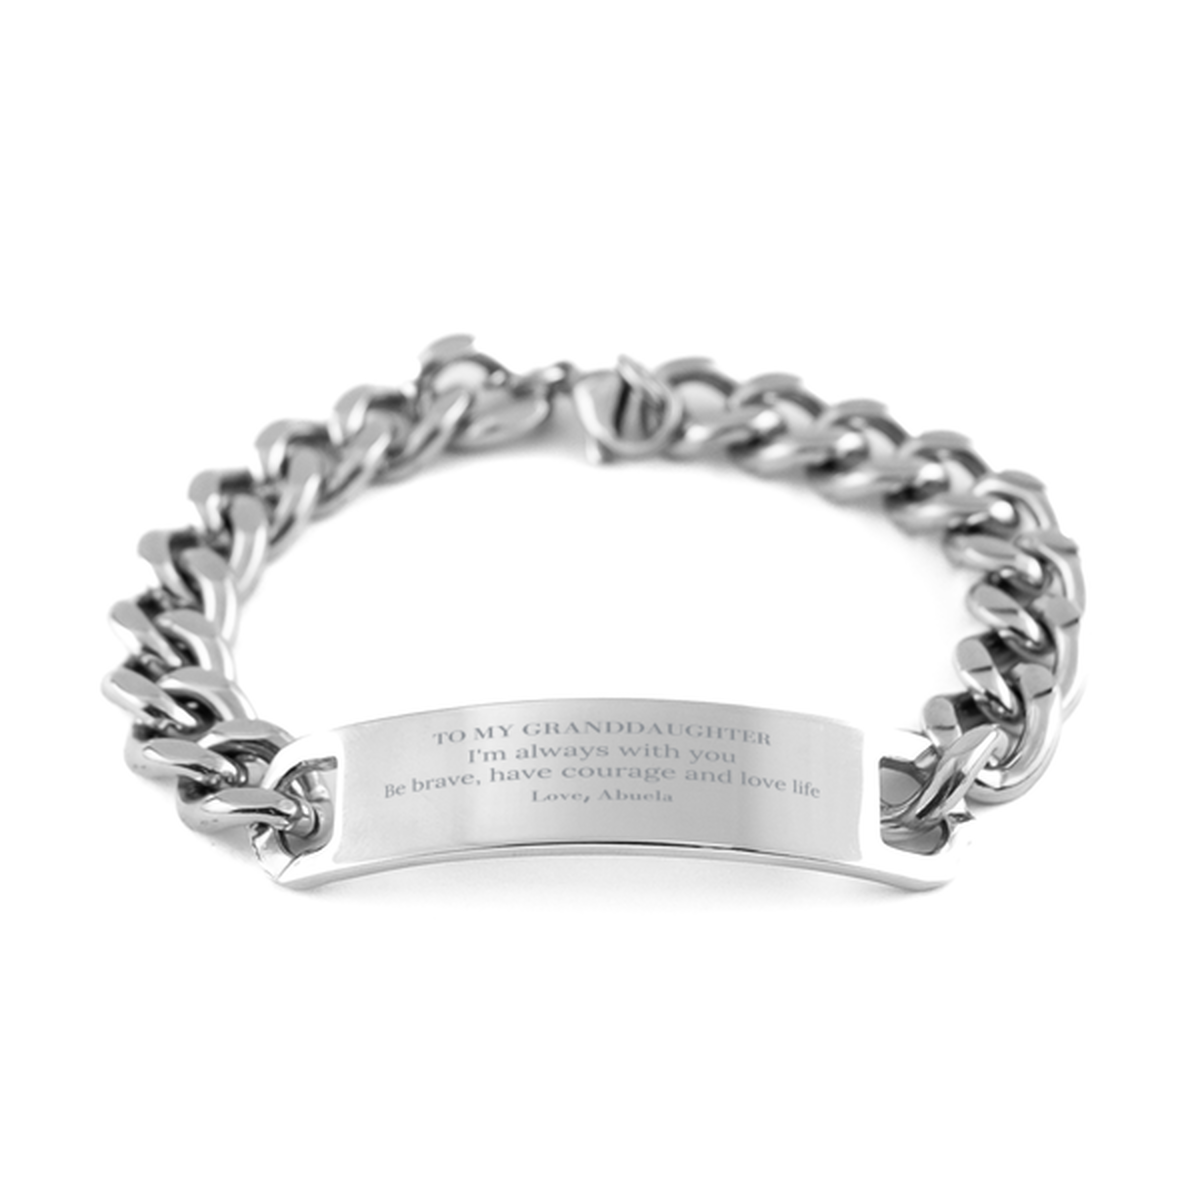 To My Granddaughter Gifts from Abuela, Unique Cuban Chain Stainless Steel Bracelet Inspirational Christmas Birthday Graduation Gifts for Granddaughter I'm always with you. Be brave, have courage and love life. Love, Abuela